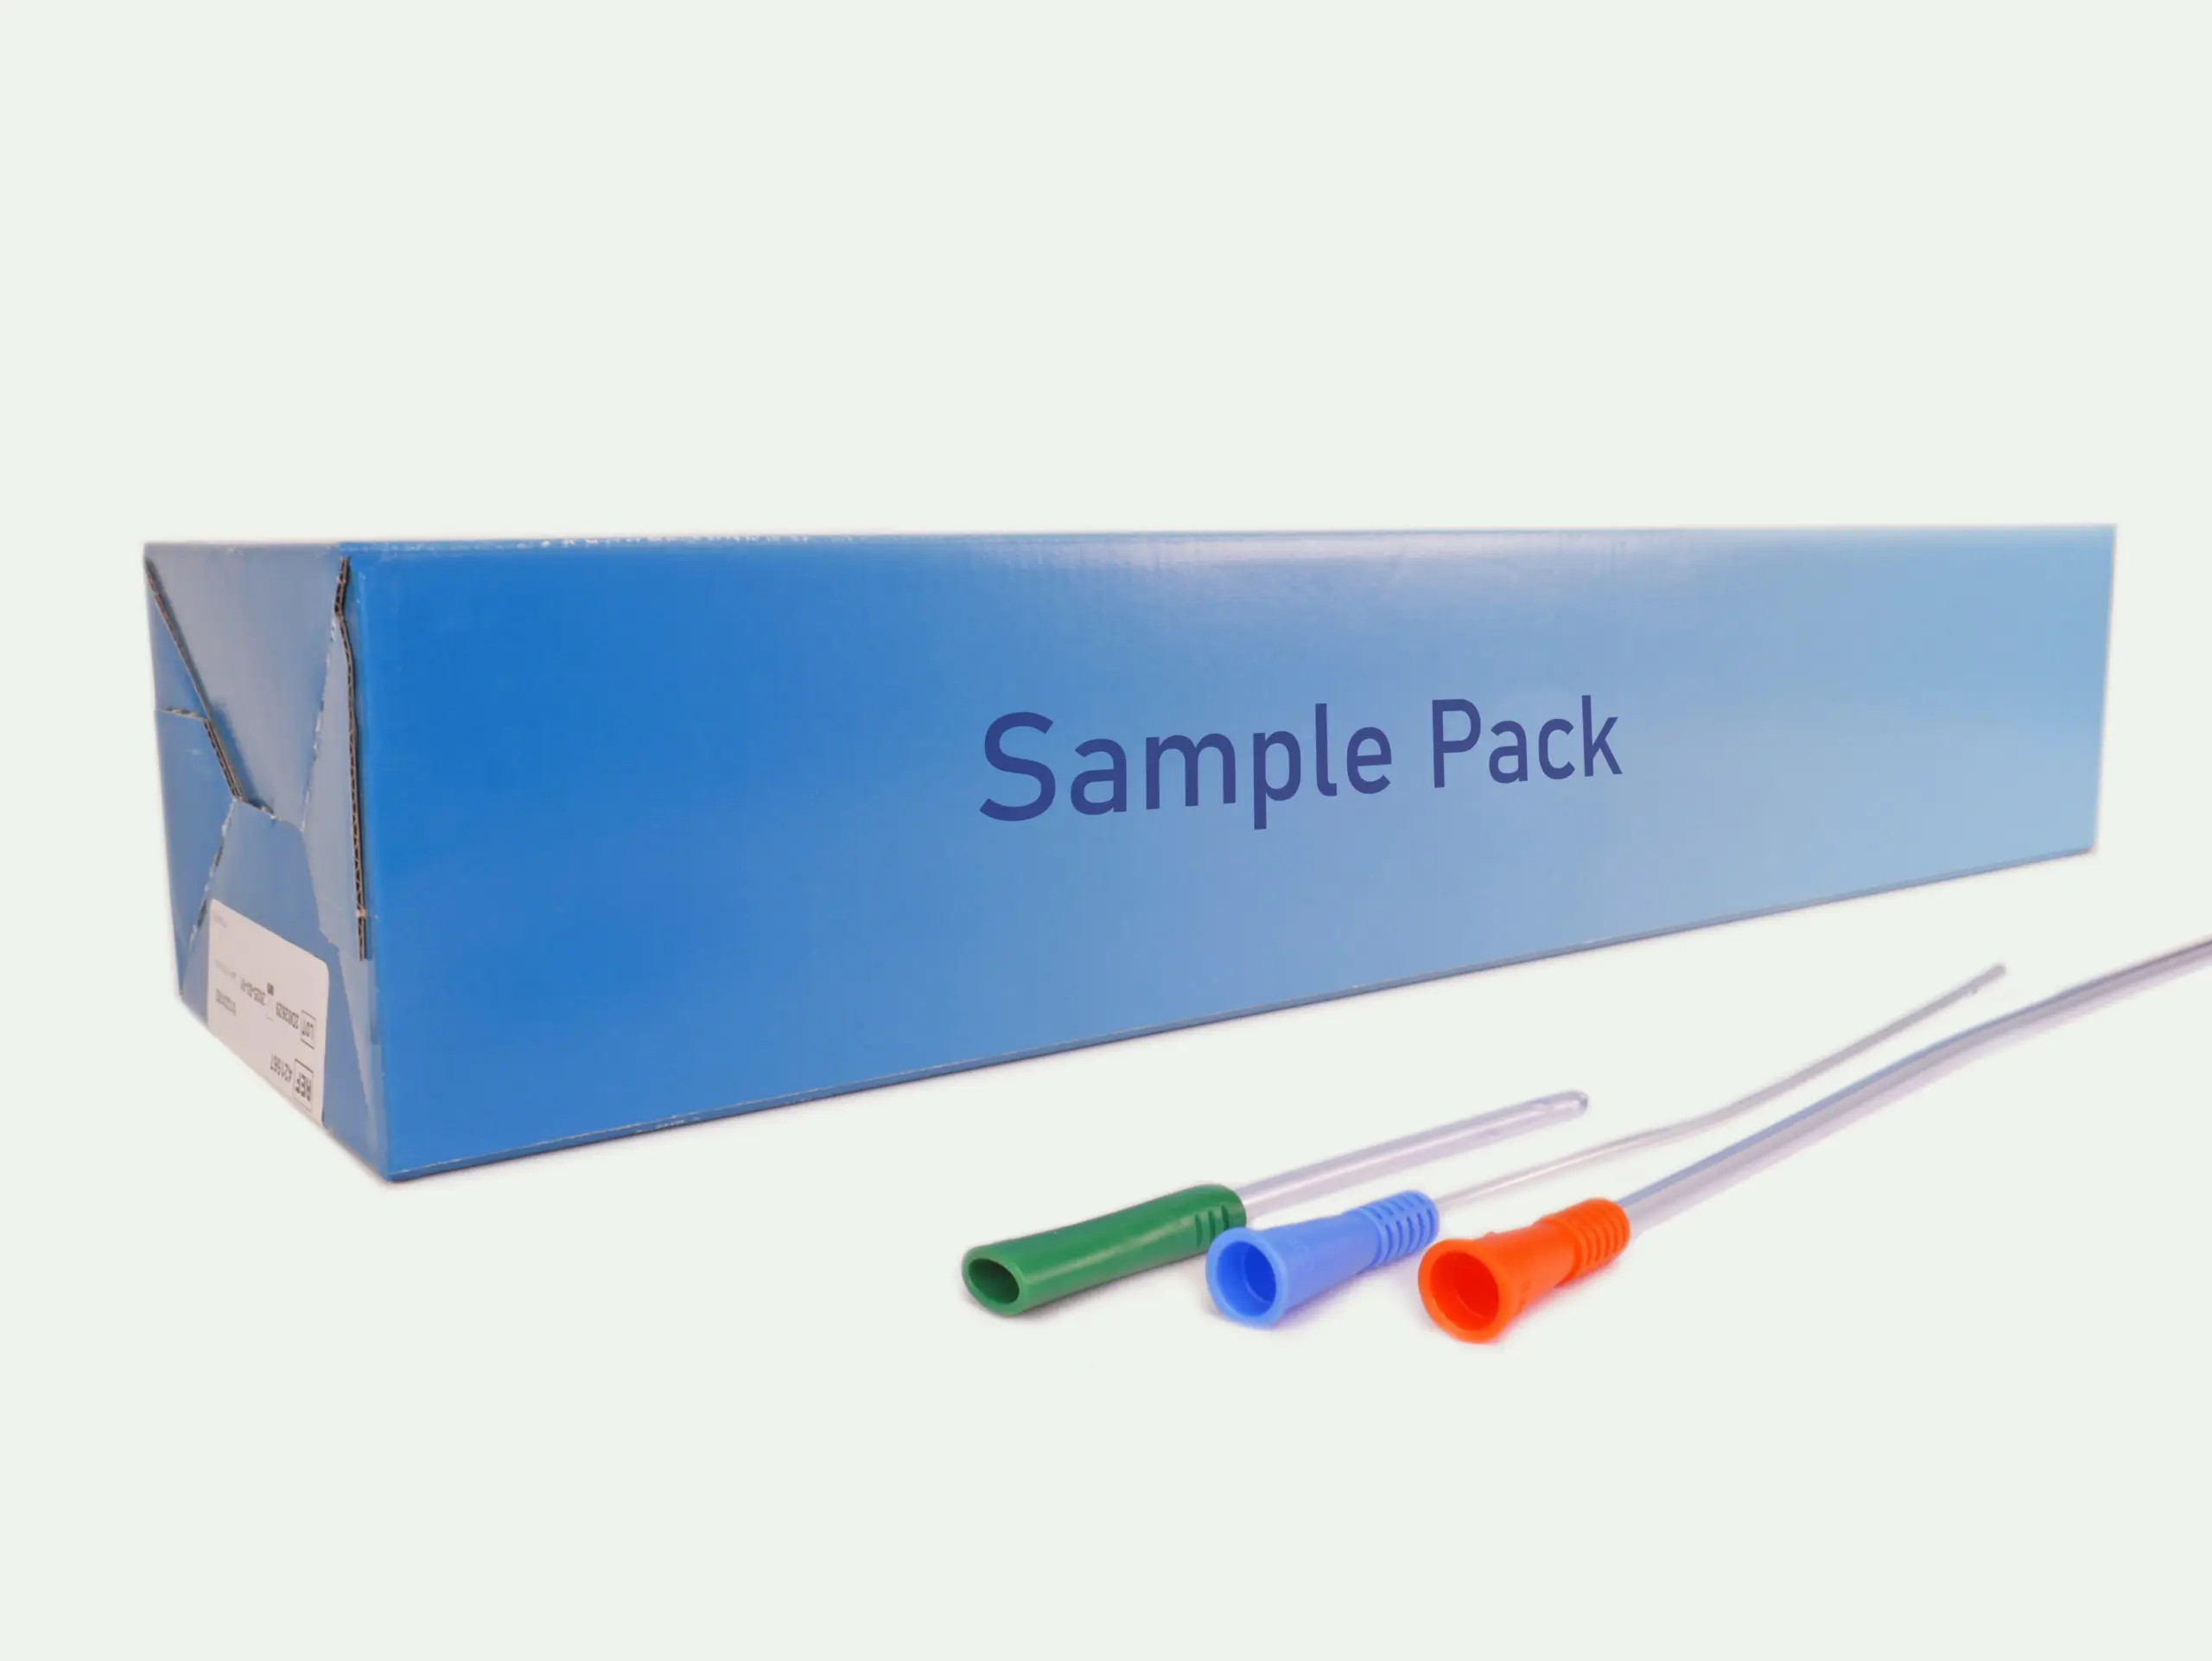 Picture of the box of 3-Day Free Sample Pack of catheters from RA Fischer. In front of the box are three of the catheters available, one long with an orange gripper, one medium length with a blue gripper, one short with a green gripper [ Personalized urology care ]